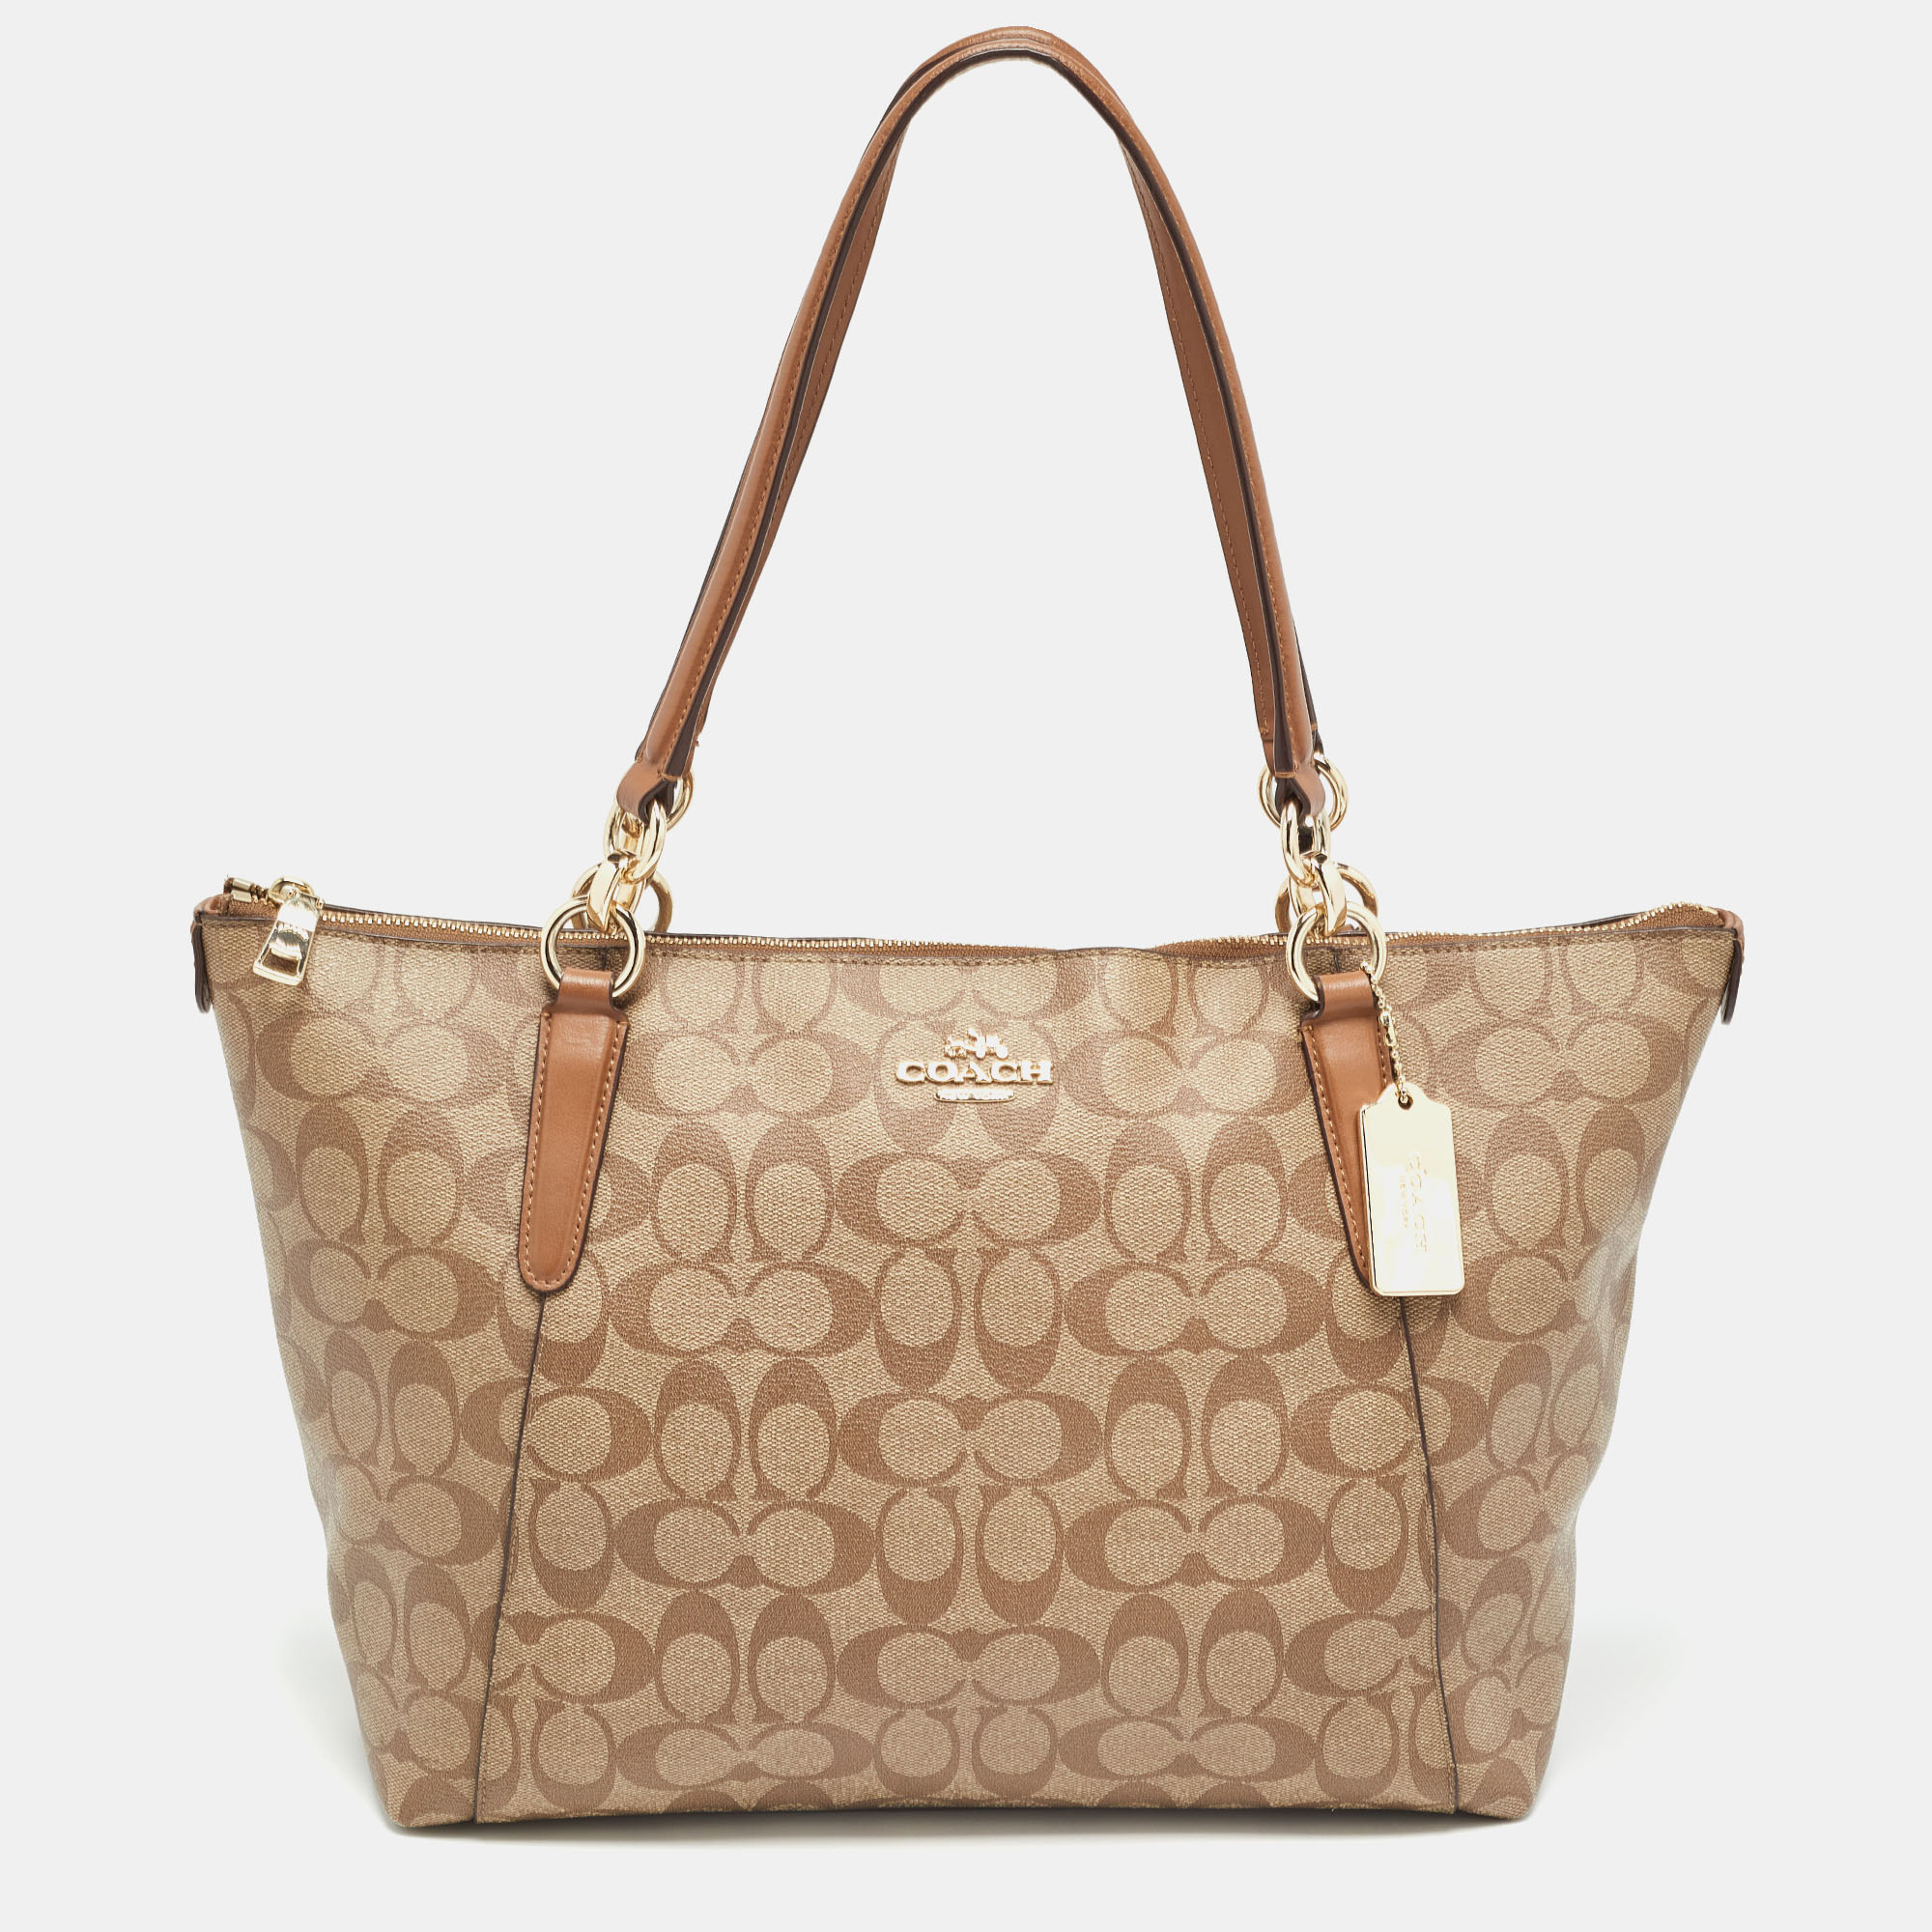 

Coach Brown/Beige Signature Coated Canvas and Leather Ava Tote